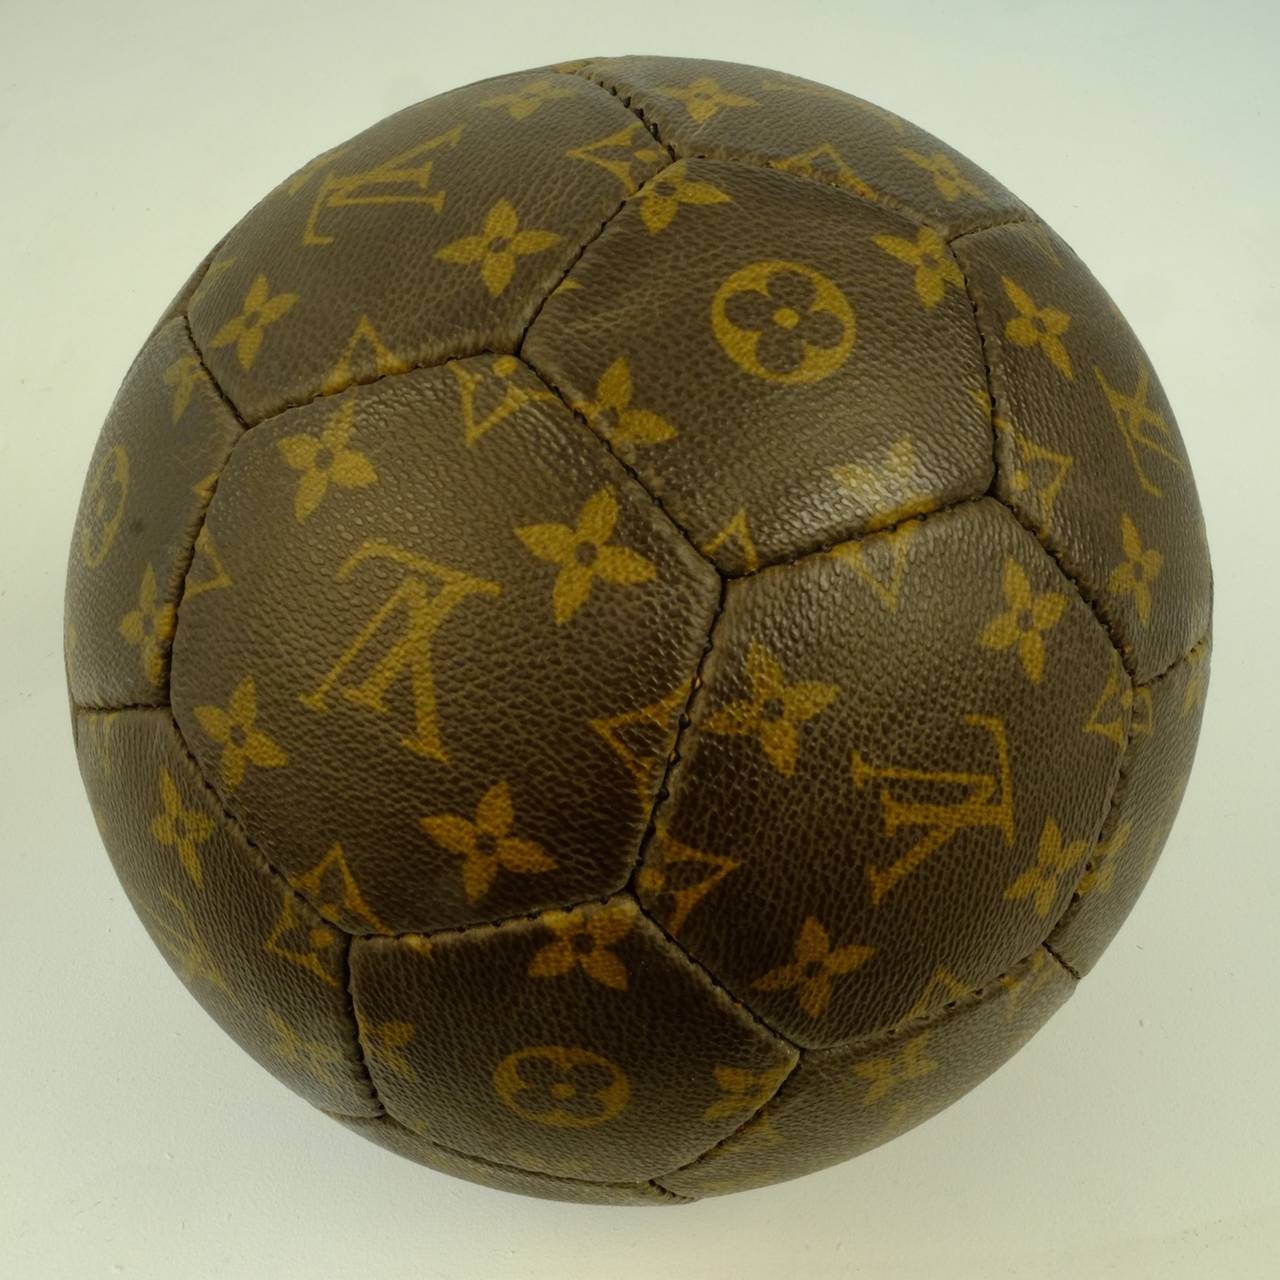 Louis Vuitton 1998 pre-owned World Cup Ball - Farfetch